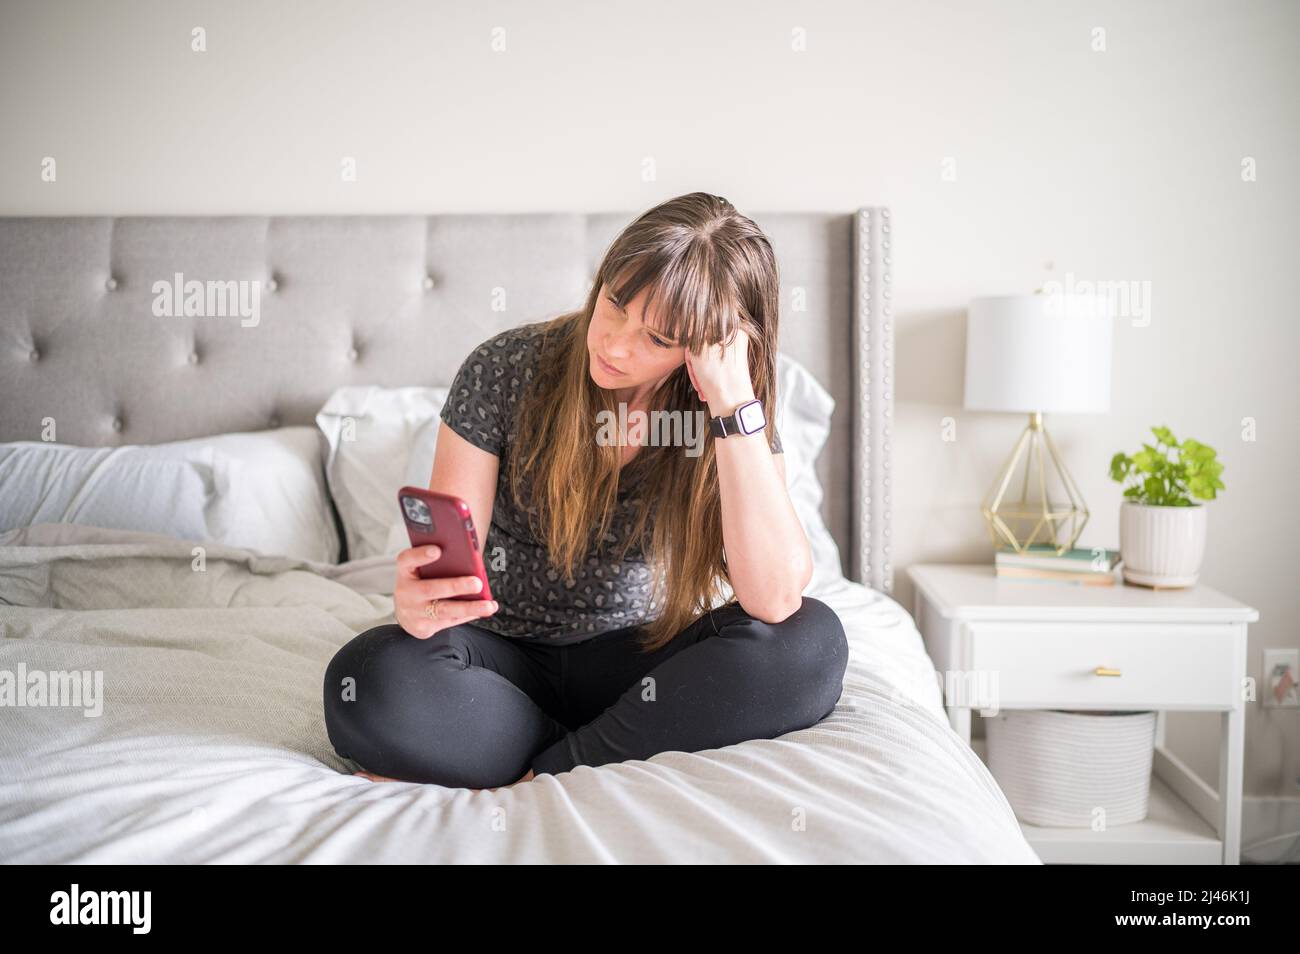 Woman sitting on bed while scrolling on her phone Stock Photo